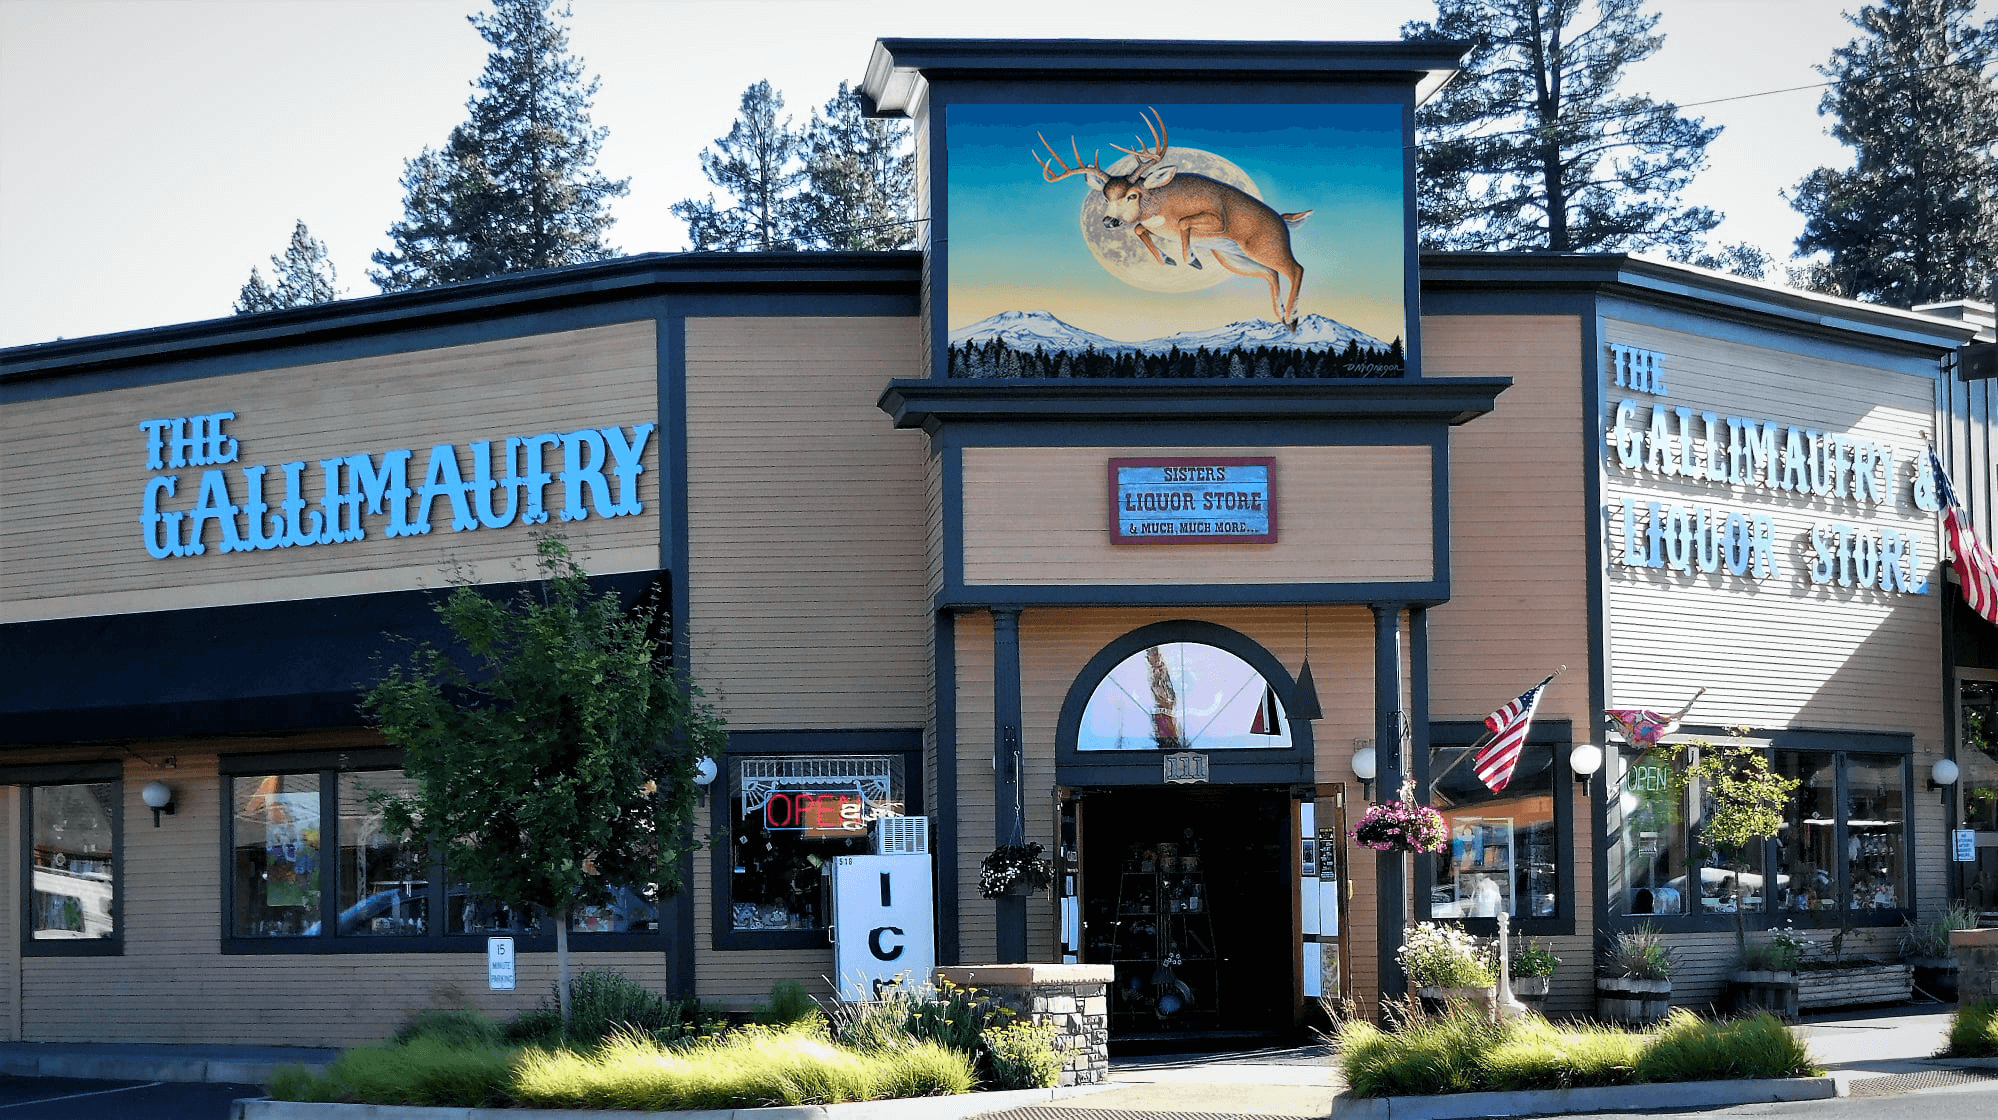 Welcome to The Gallimaufry Liquor Store in Sisters, Oregon